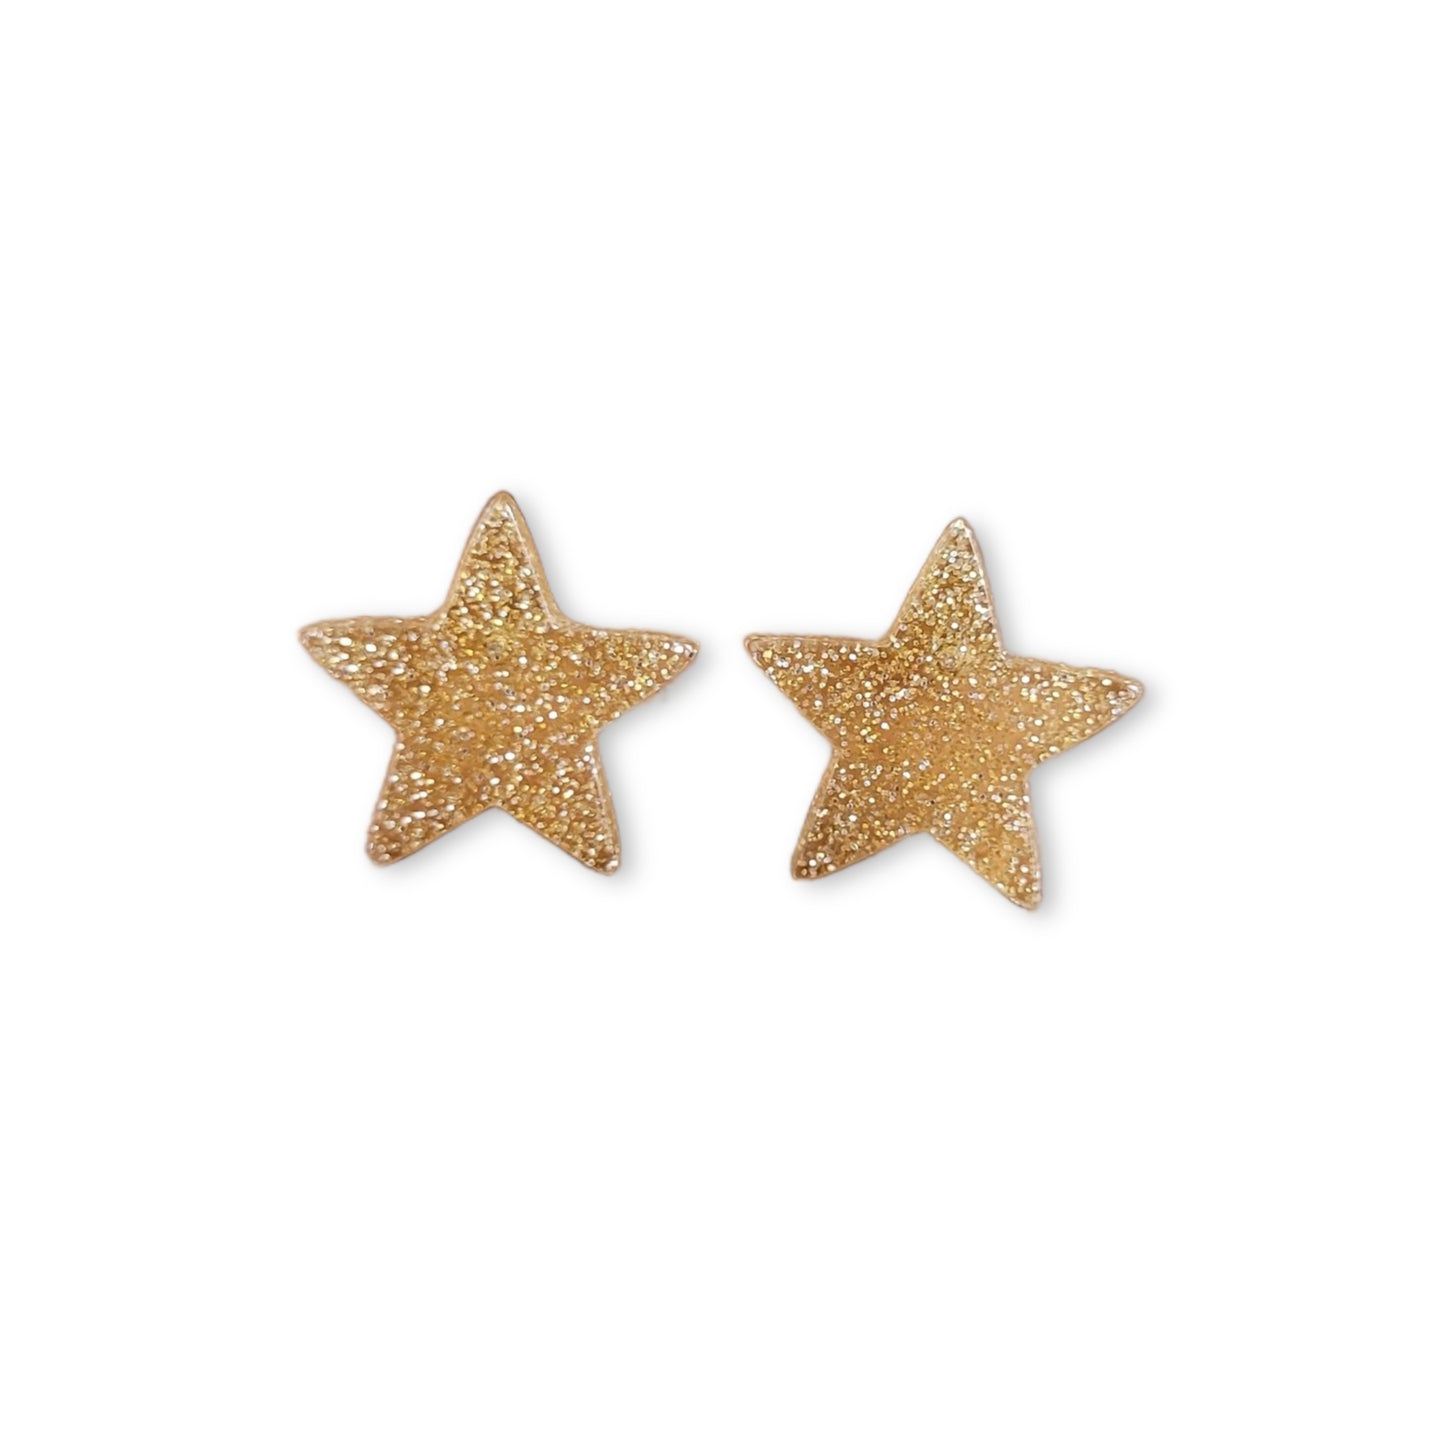 Blessed and Highly Favored Star Earrings